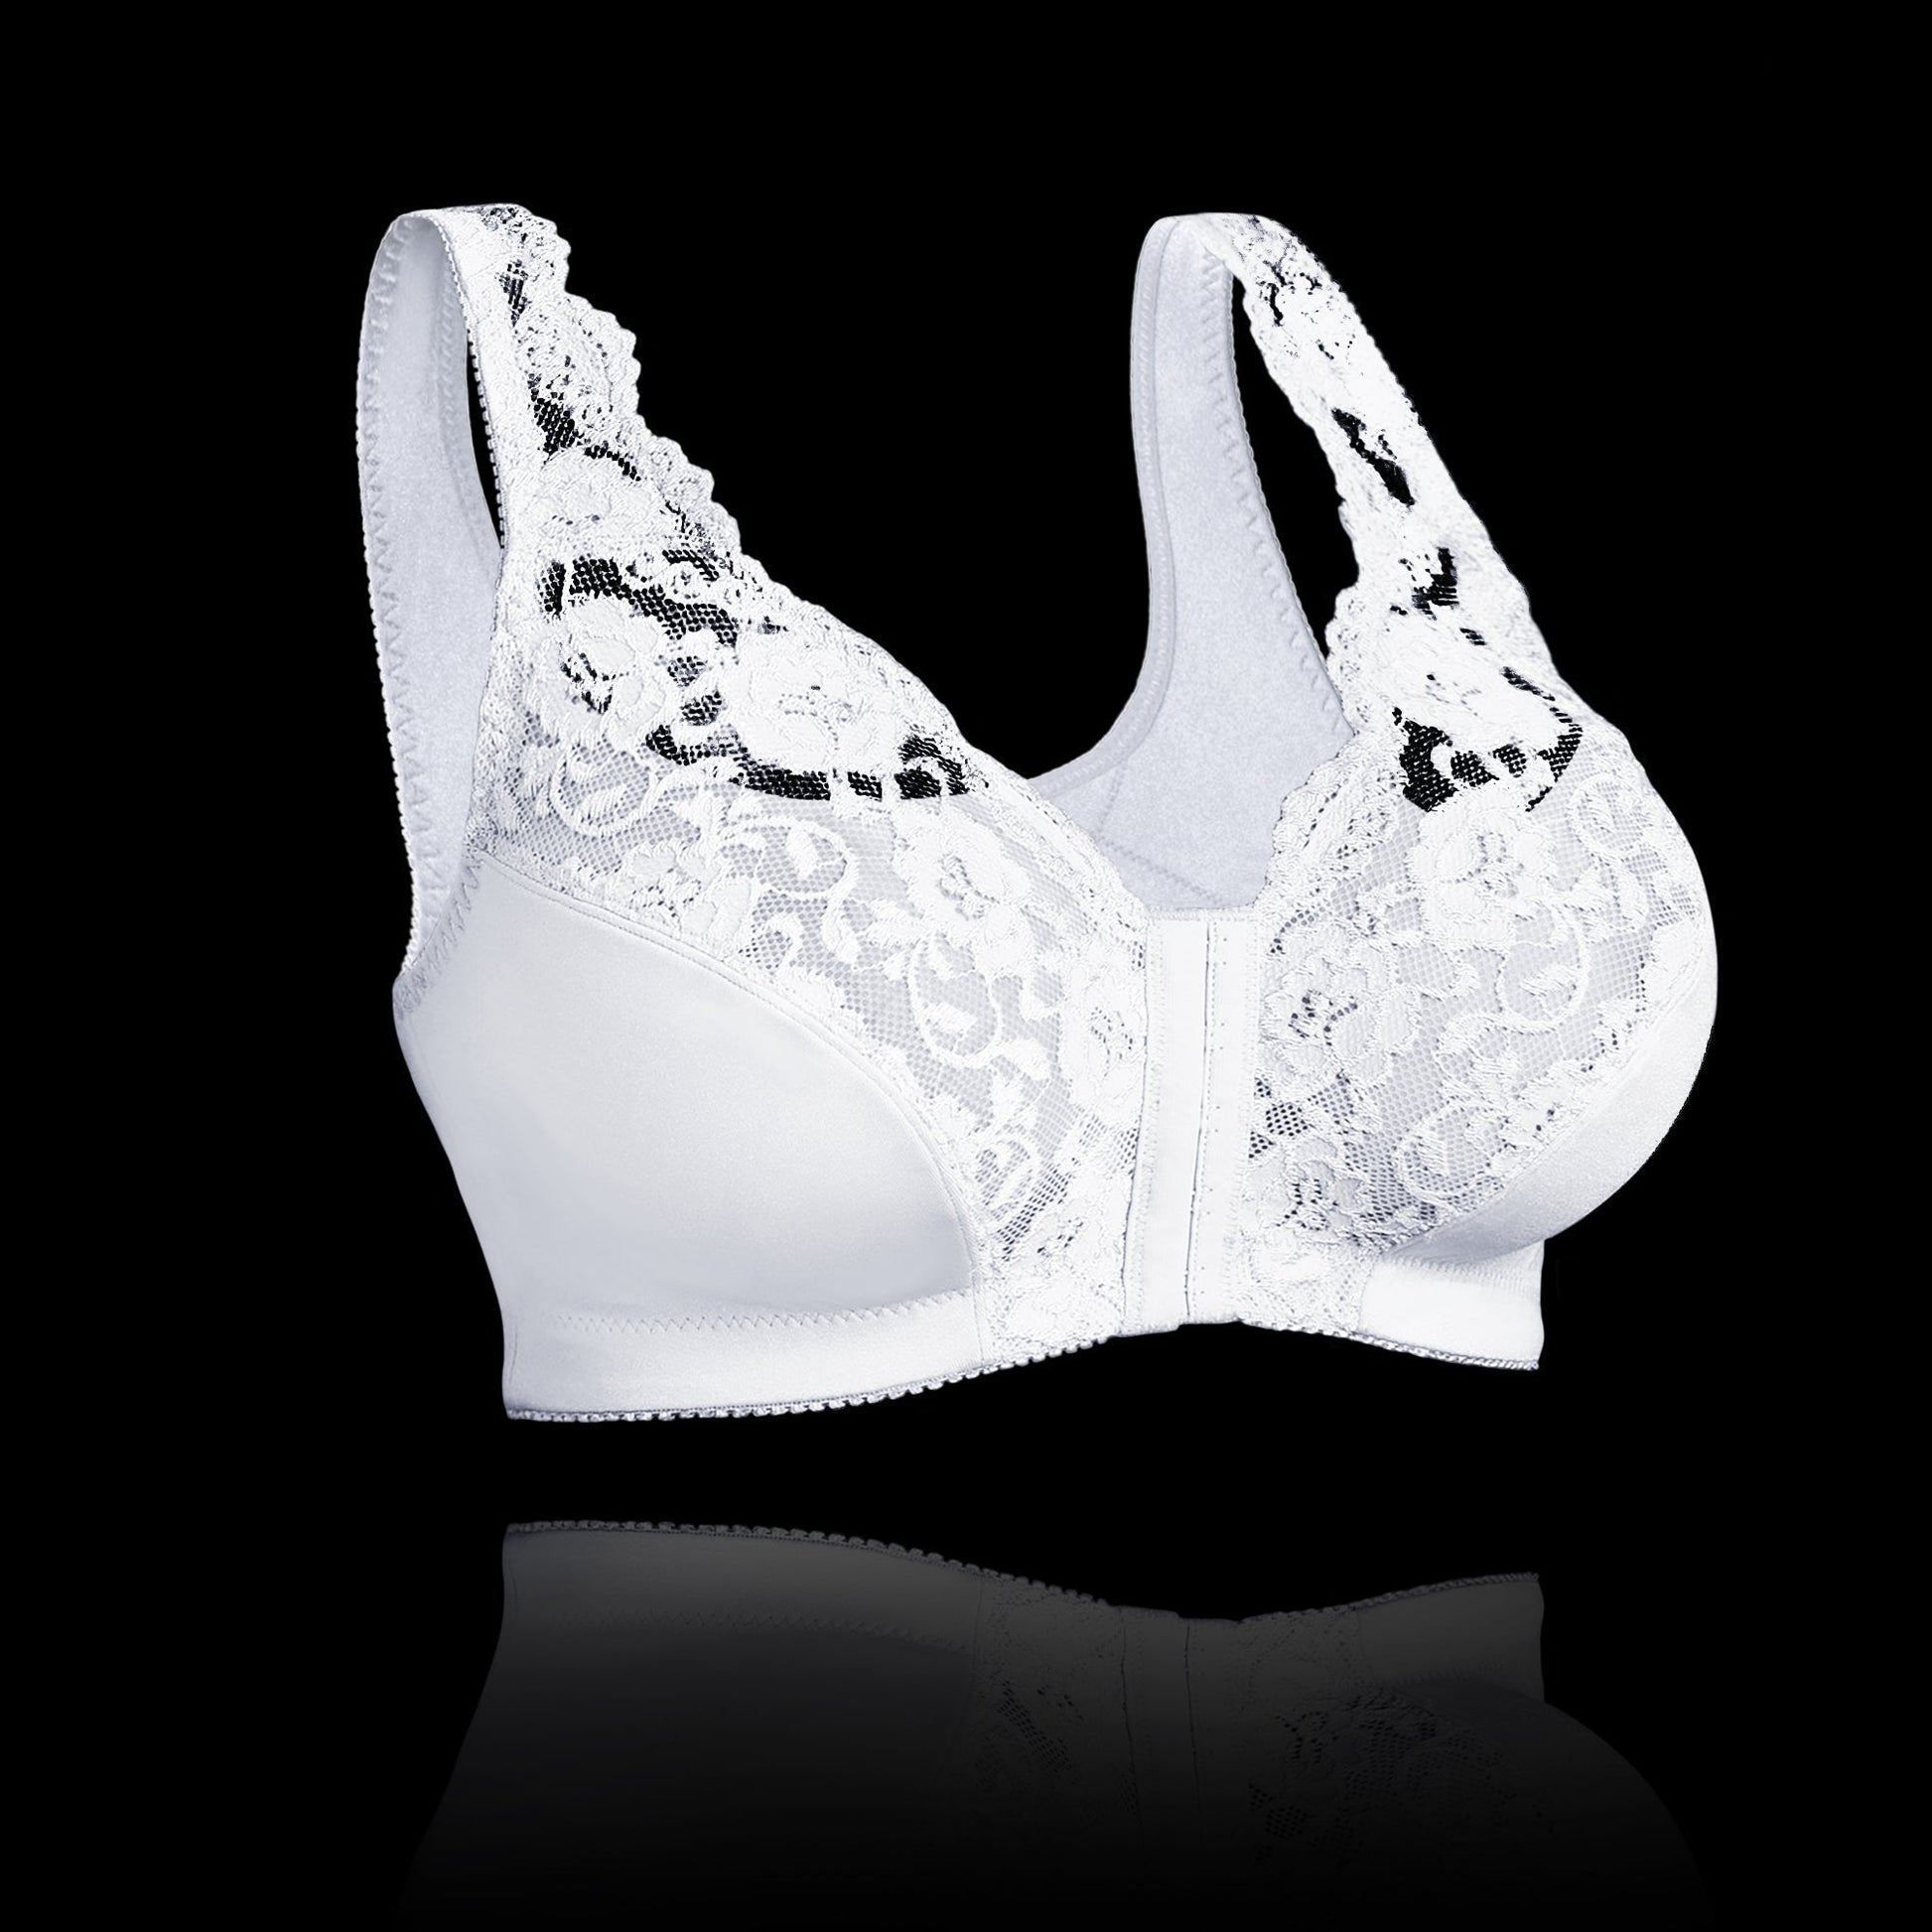 Zivame - Breast-sagging is natural, but the right bra can help correct it.  Our True Curv Sag Lift Bra works like magic on lifting sagging breasts,  while providing supreme support & comfort.